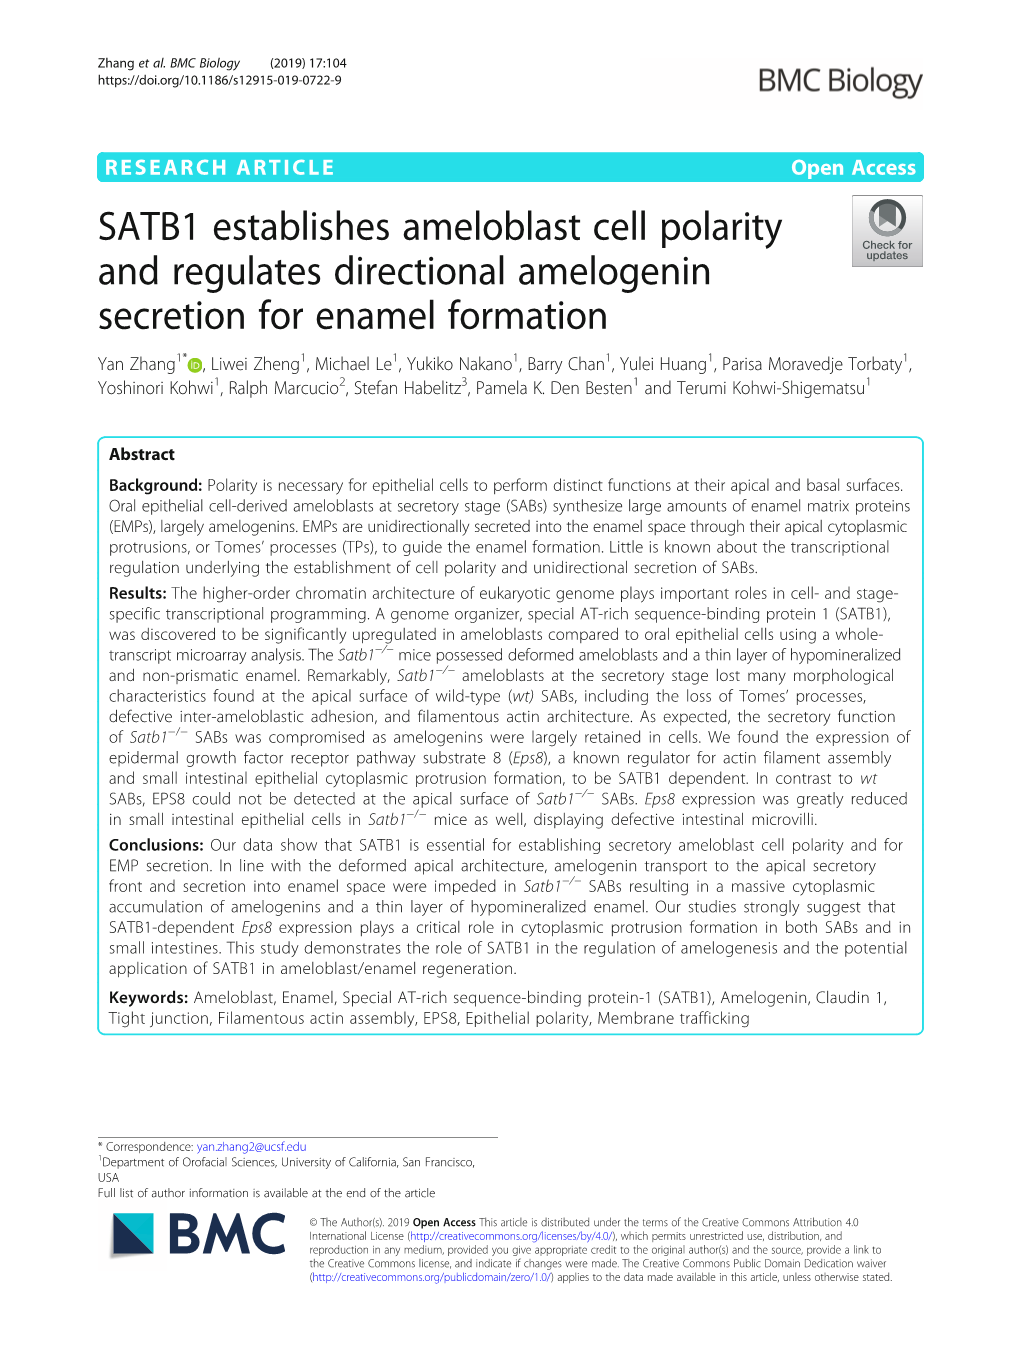 SATB1 Establishes Ameloblast Cell Polarity and Regulates Directional